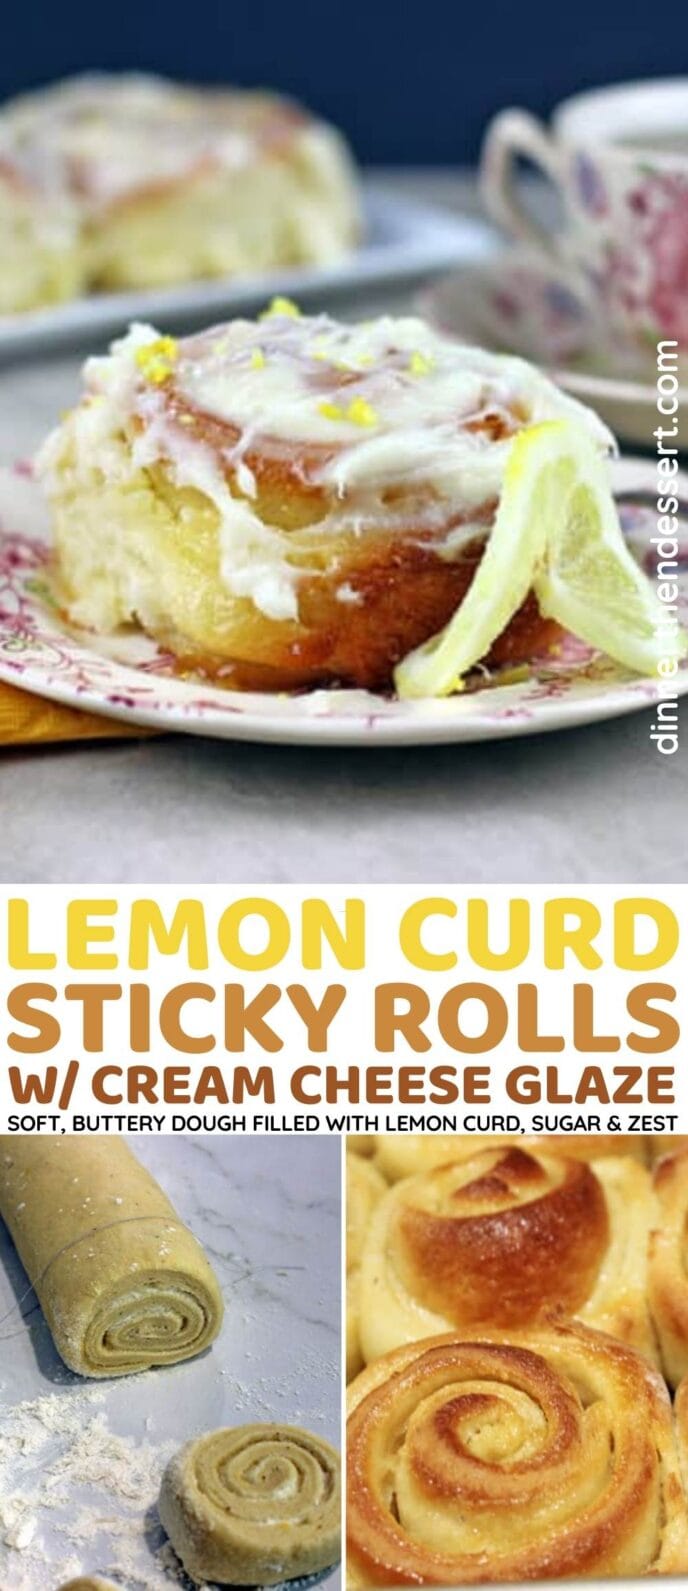 Lemon Curd Sticky Rolls with Cream Cheese Glaze Collage